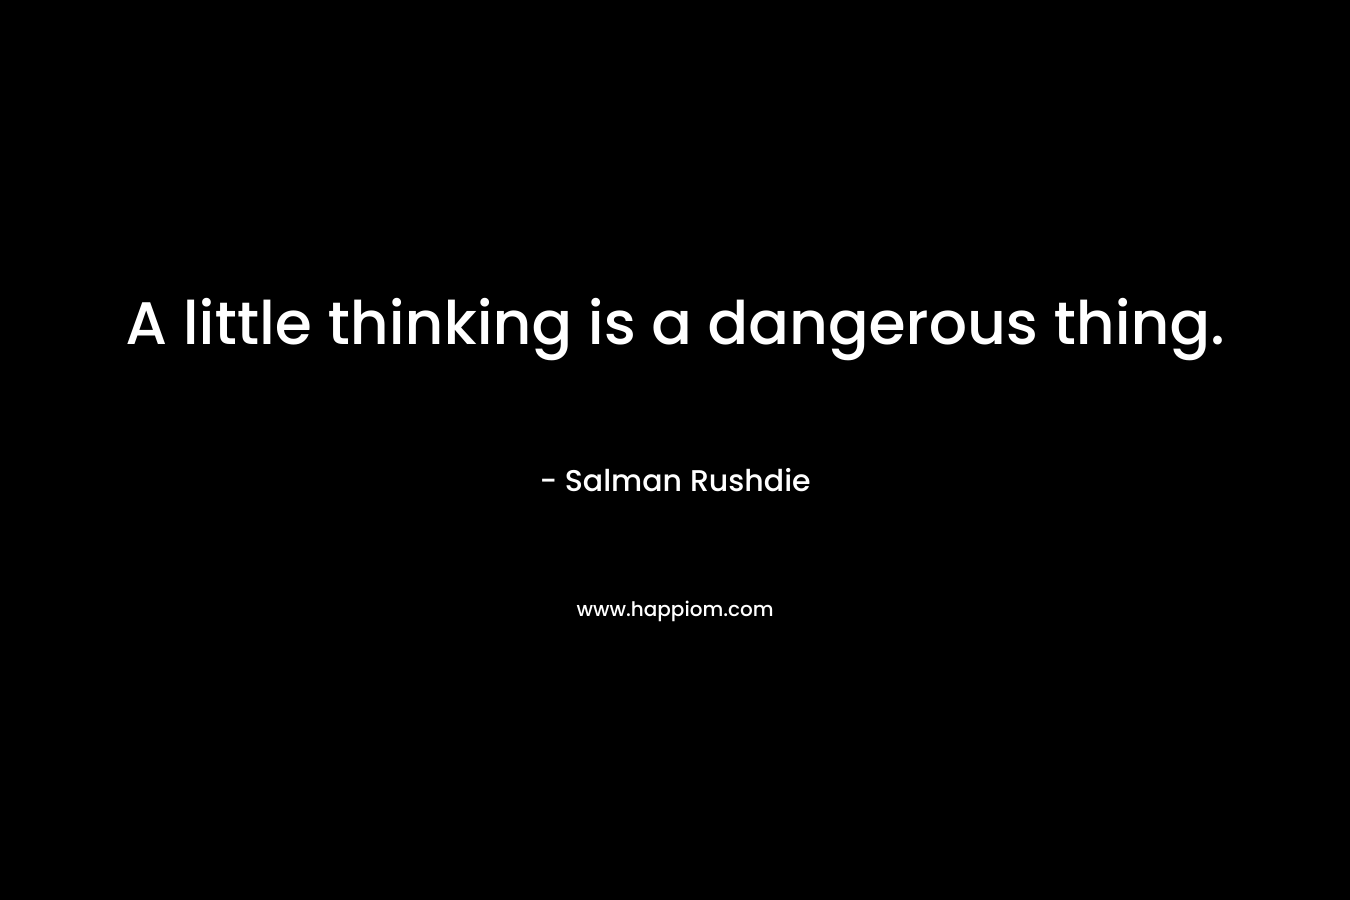 A little thinking is a dangerous thing.